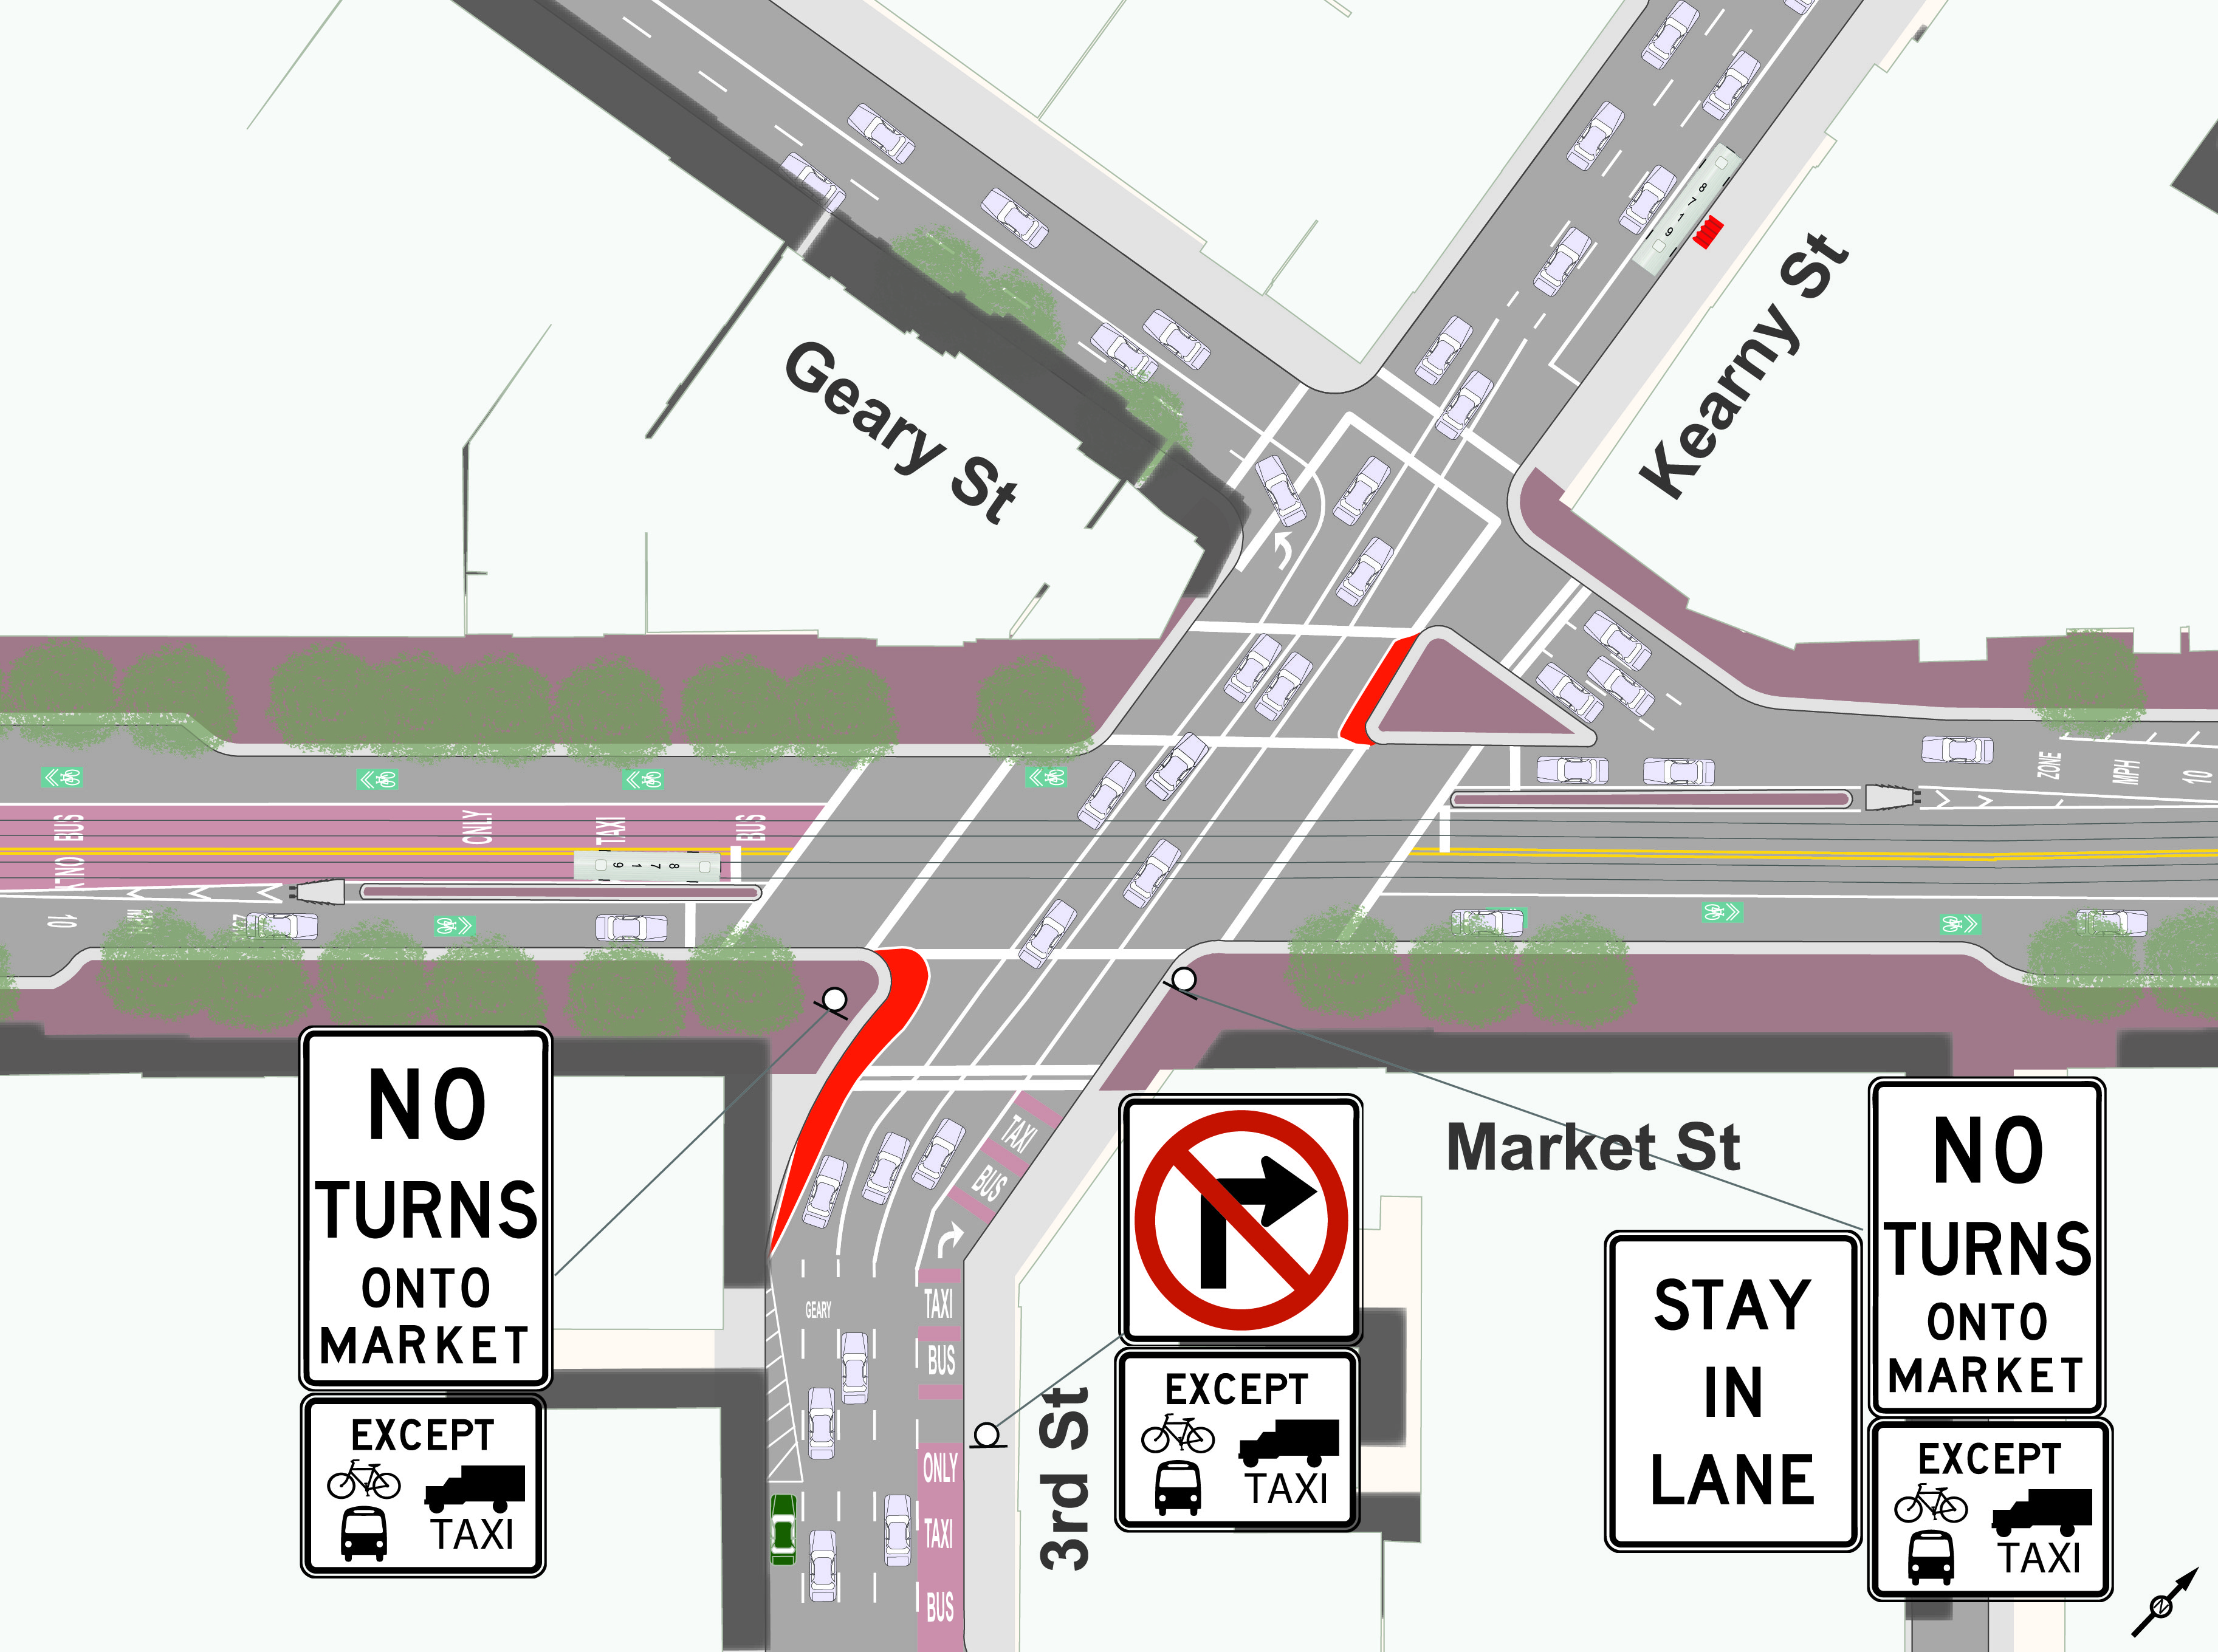 Market Street and 3rd/Kearny/Geary intersection shown with examples of the street signs that will indicate the turn restrictions.